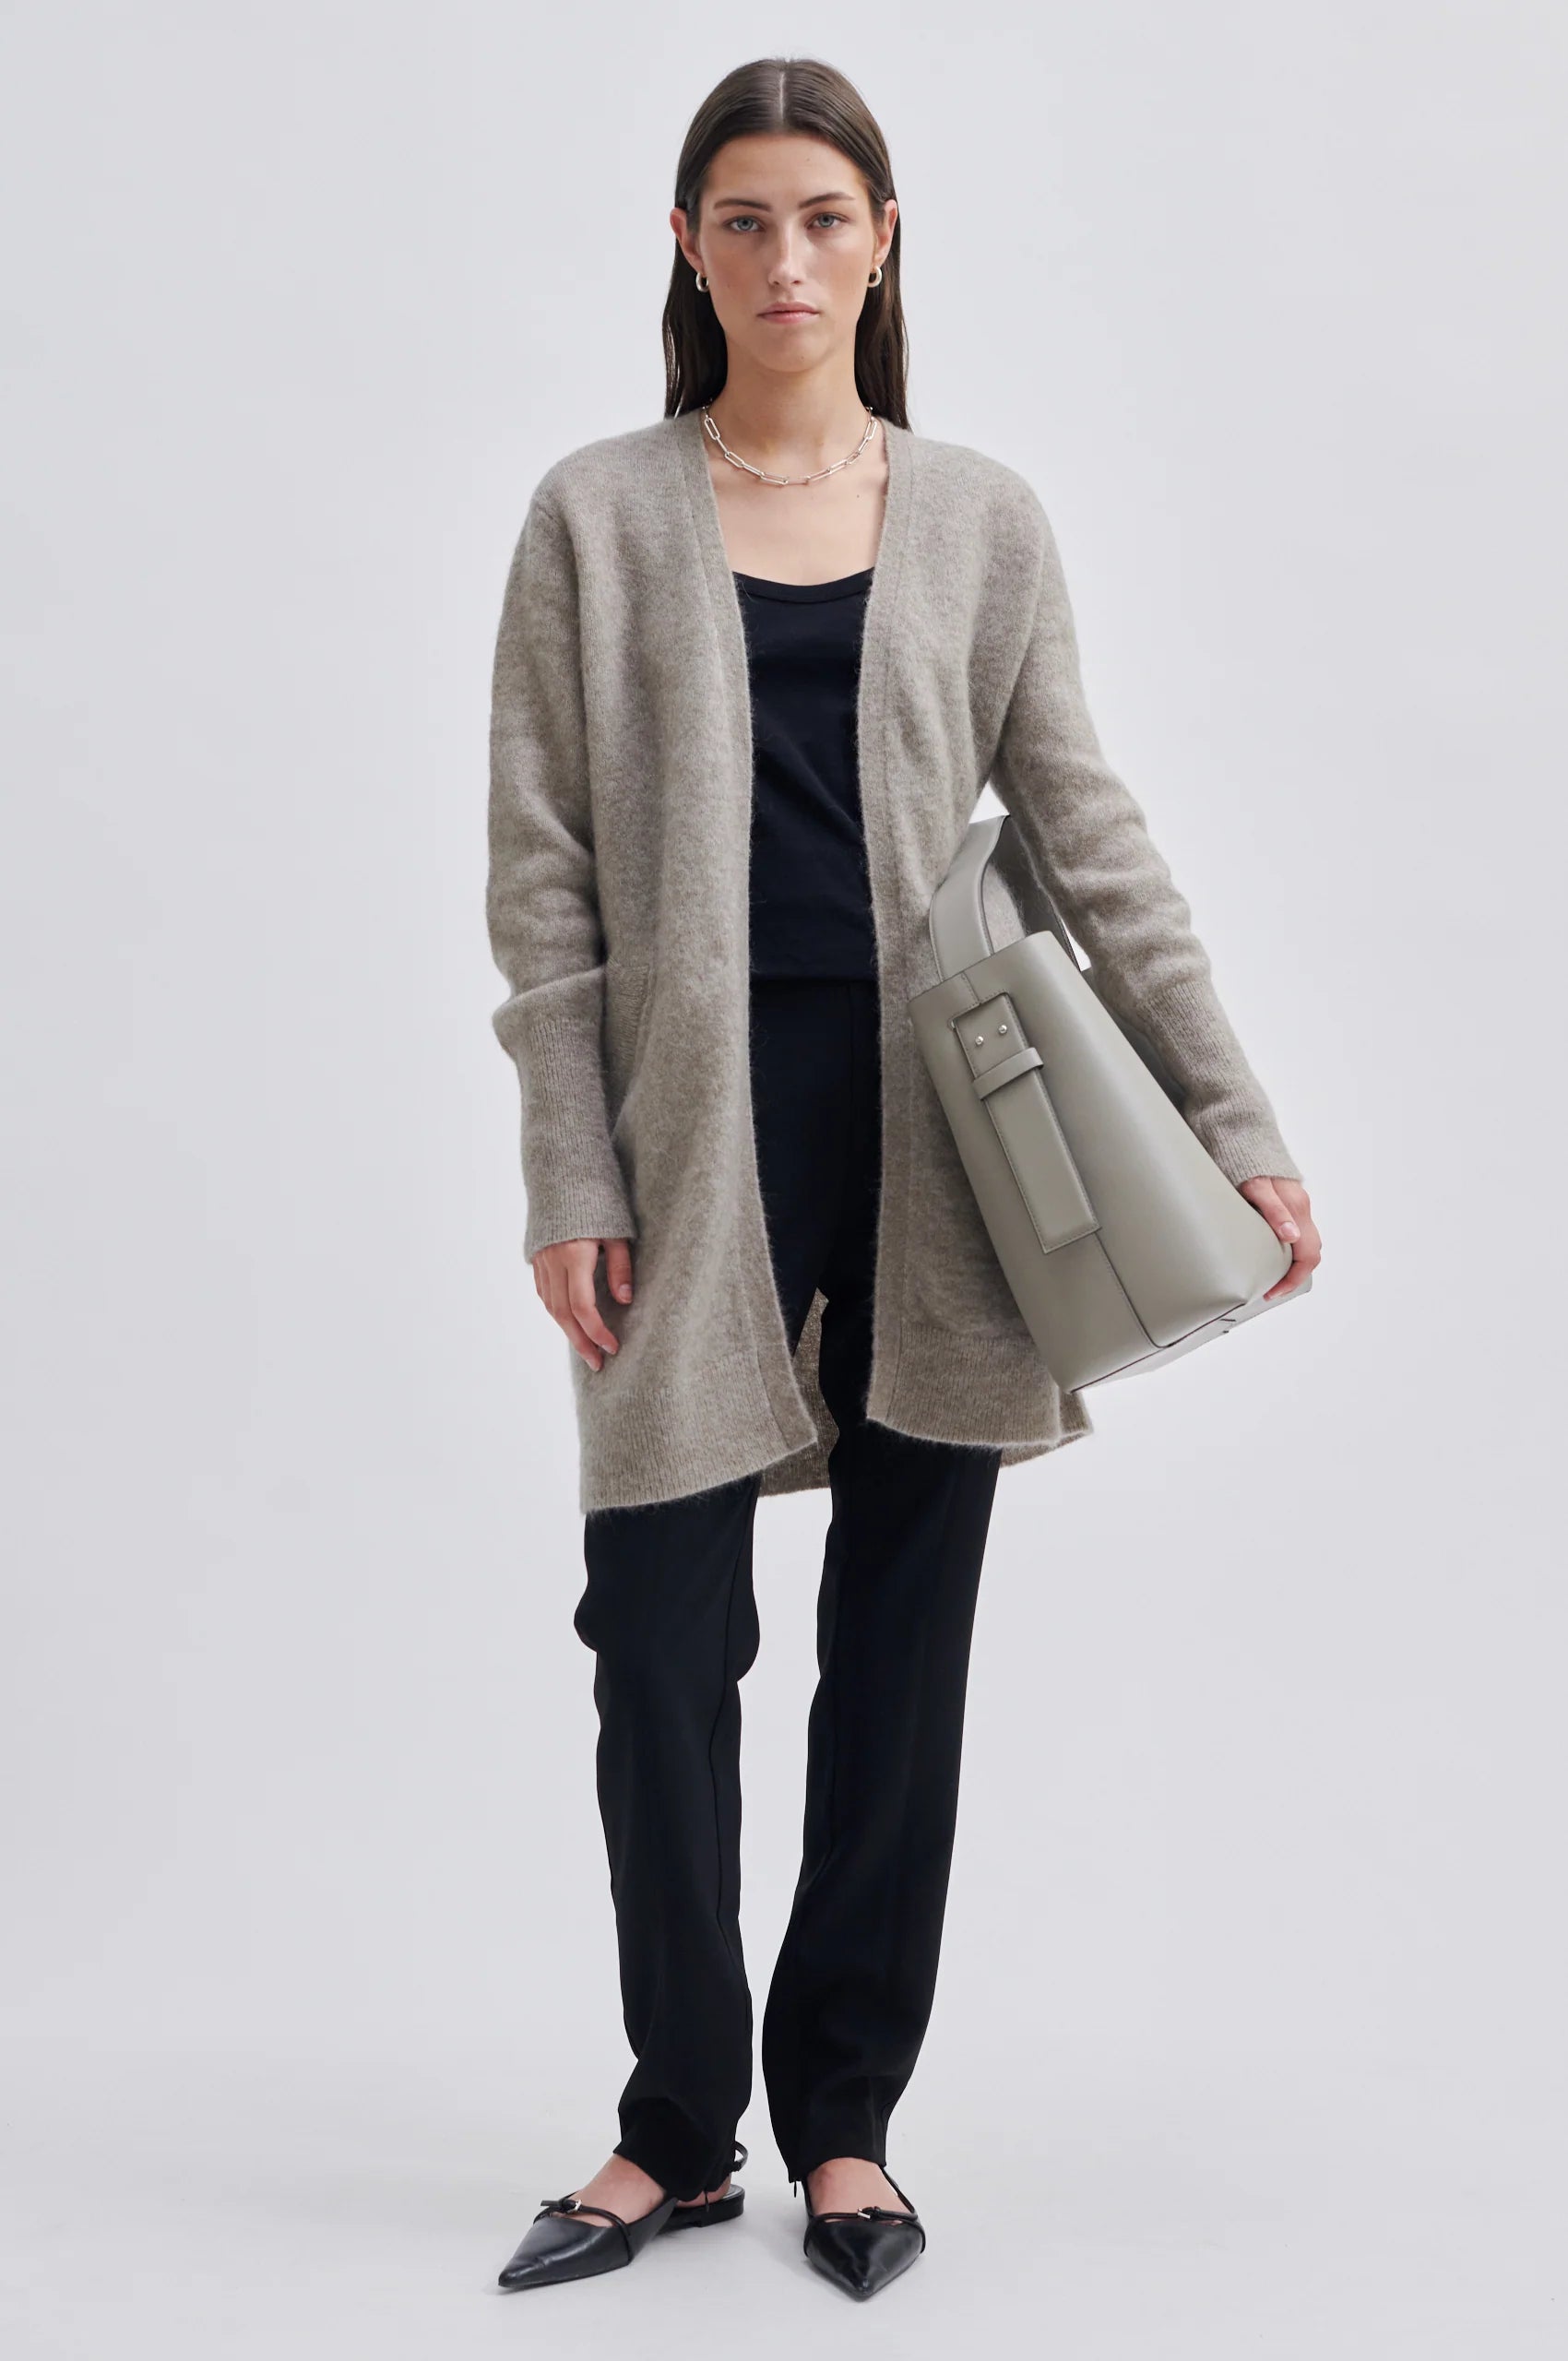 Long line edge to edge cardigan in soft taupe